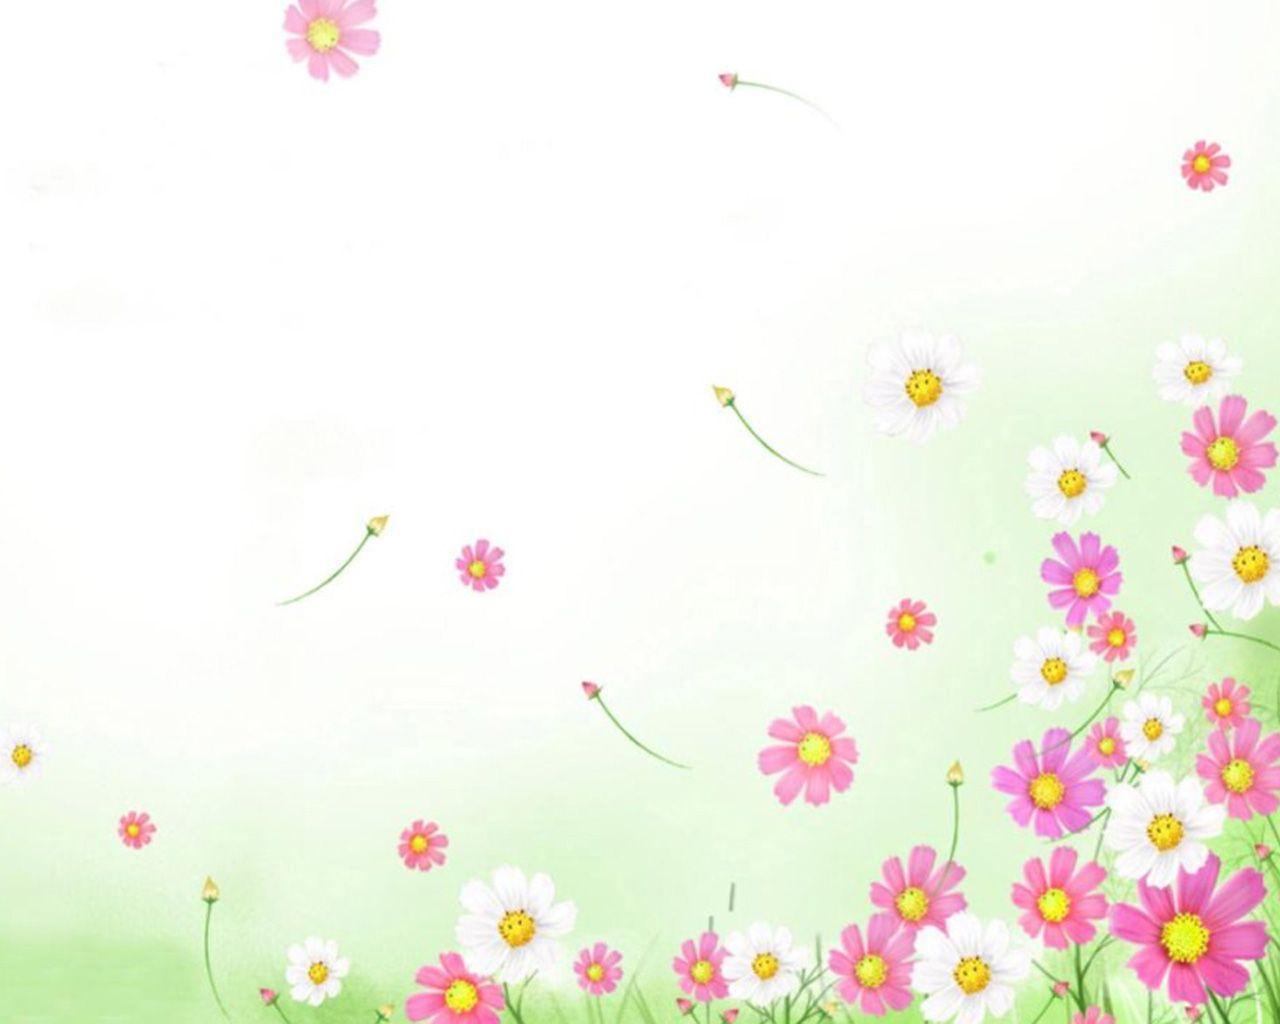 Pink Flowers 800x600 pixel PPT Background for Powerpoint